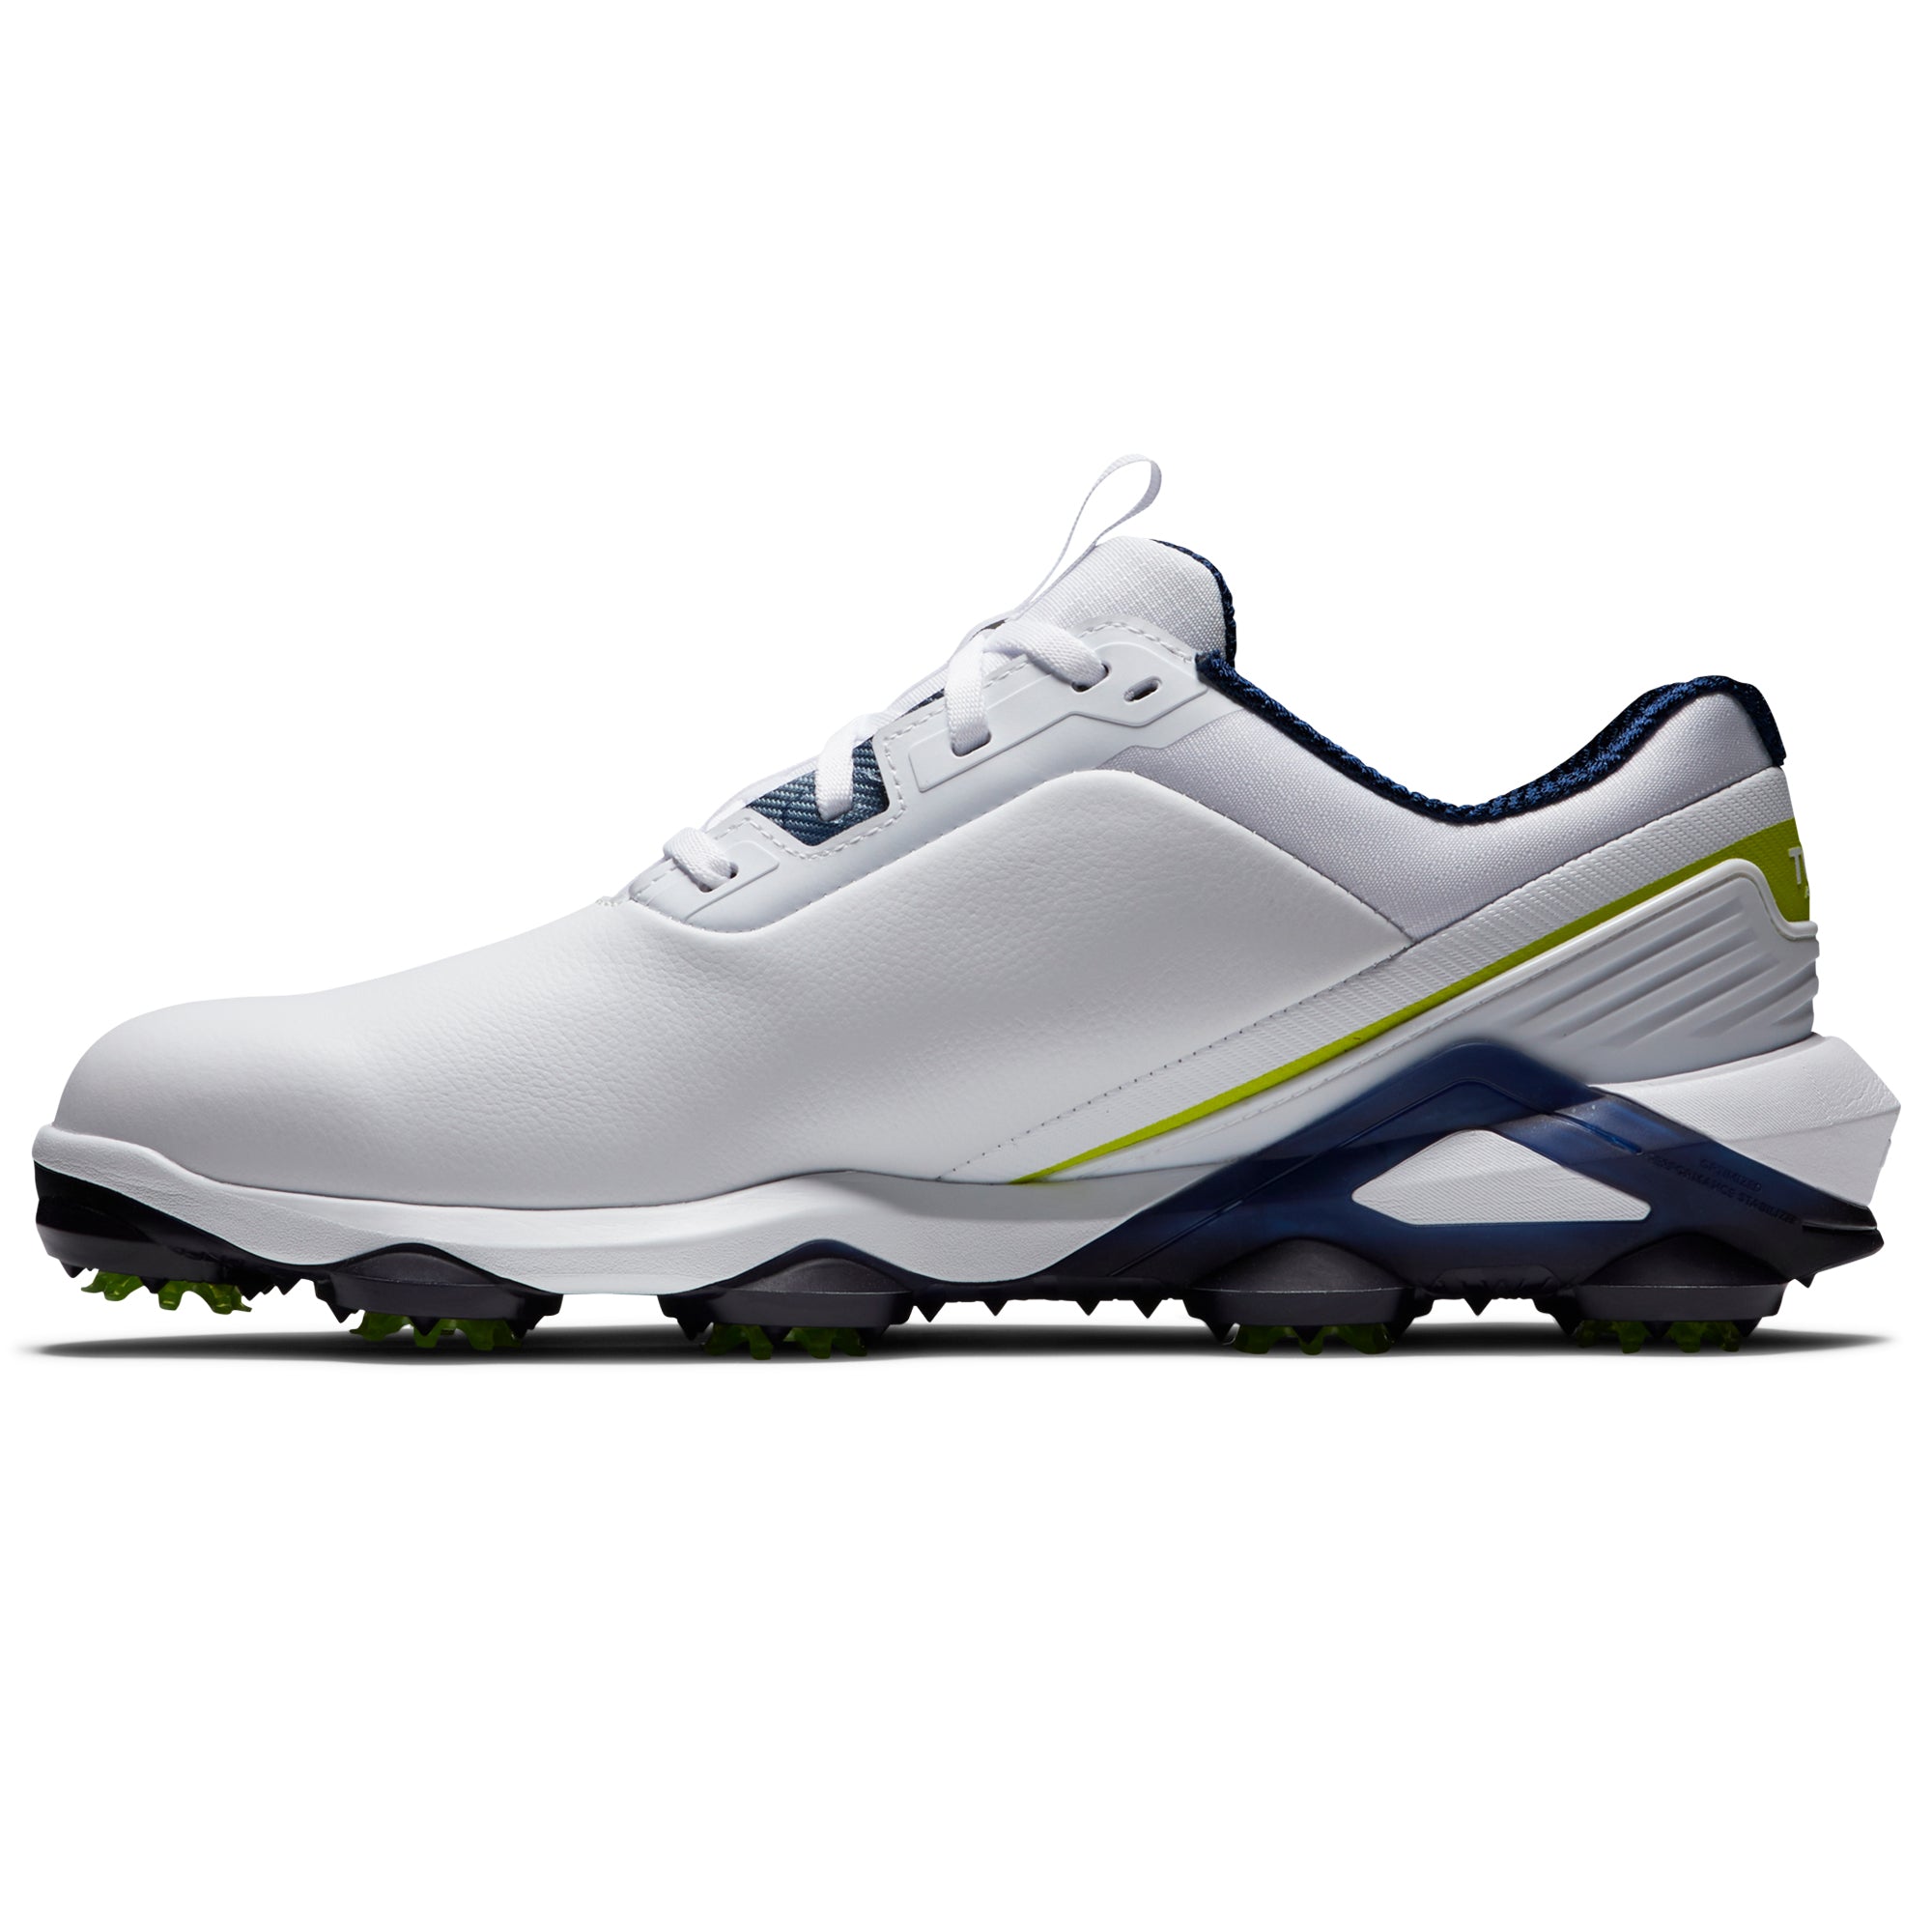 FootJoy Tour Alpha Golf Shoes 55536 White Navy Lime | Function18 ...